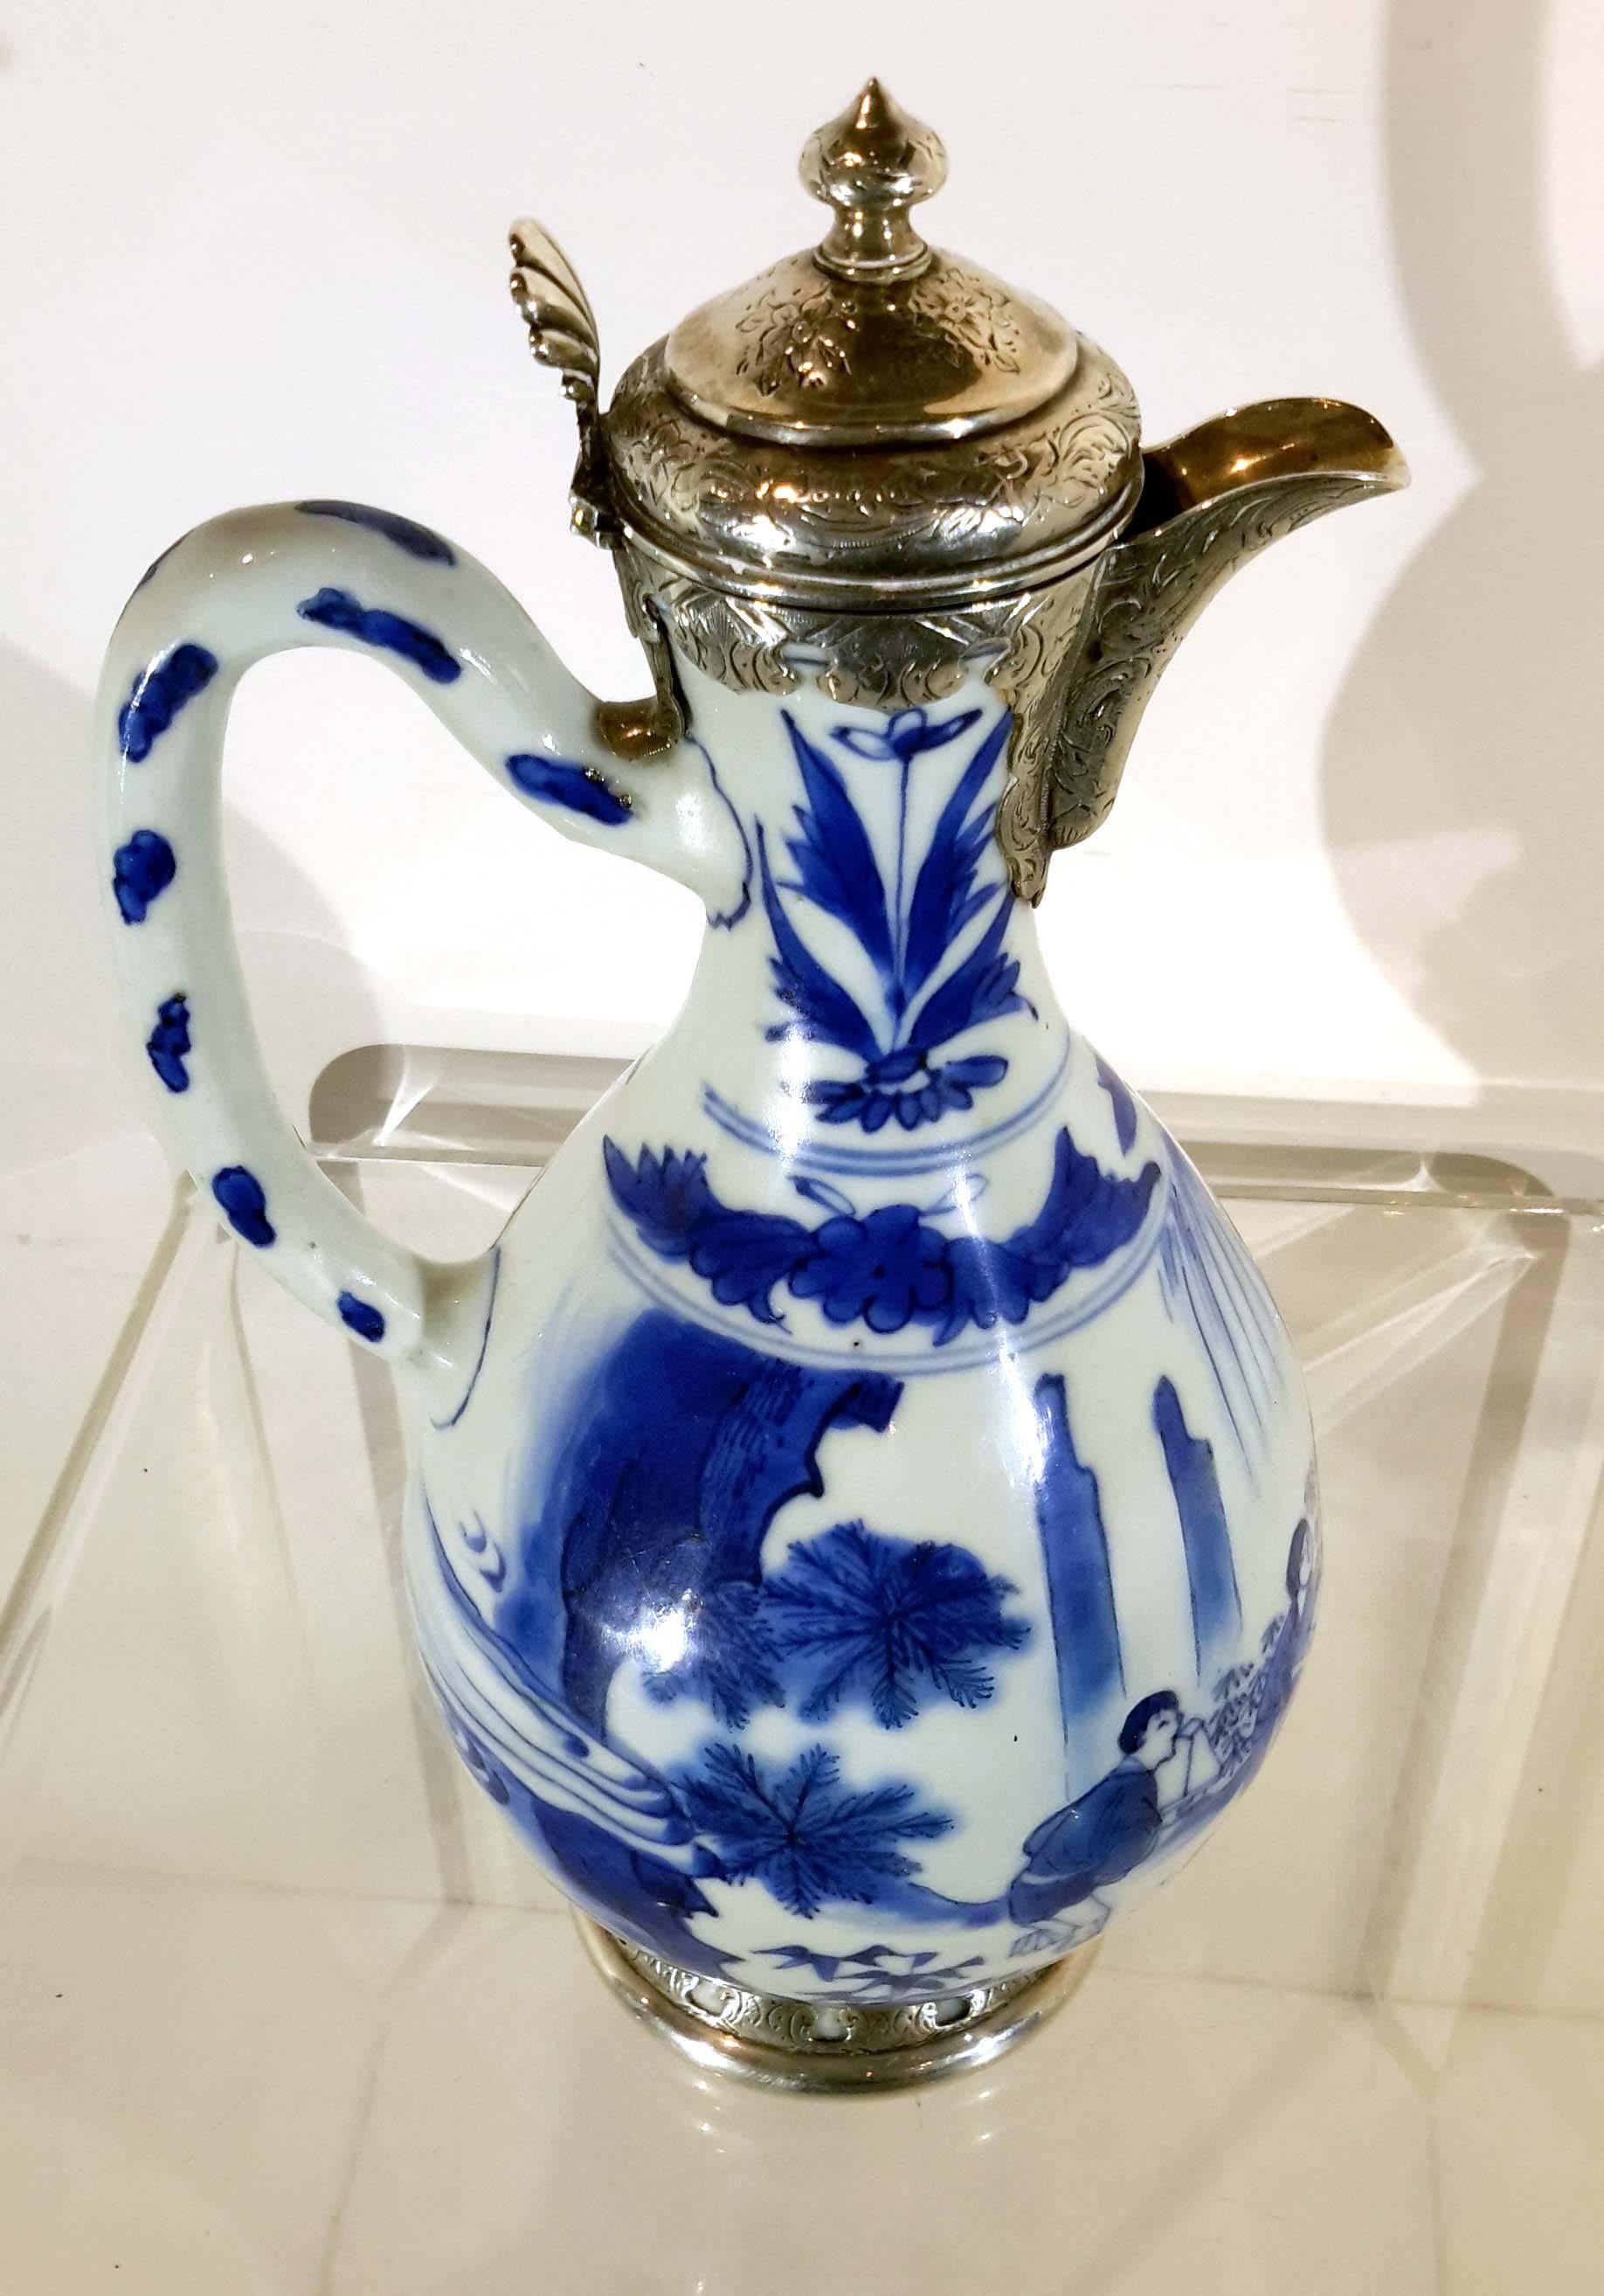 Antique Chinese blue white Ming Dynasty porcelain pitcher with silver mount. An absolutely beautiful piece of porcelain dating to the late 17th century. The form is a tall handled pitcher hand-painted with figures in a landscape. Detail is